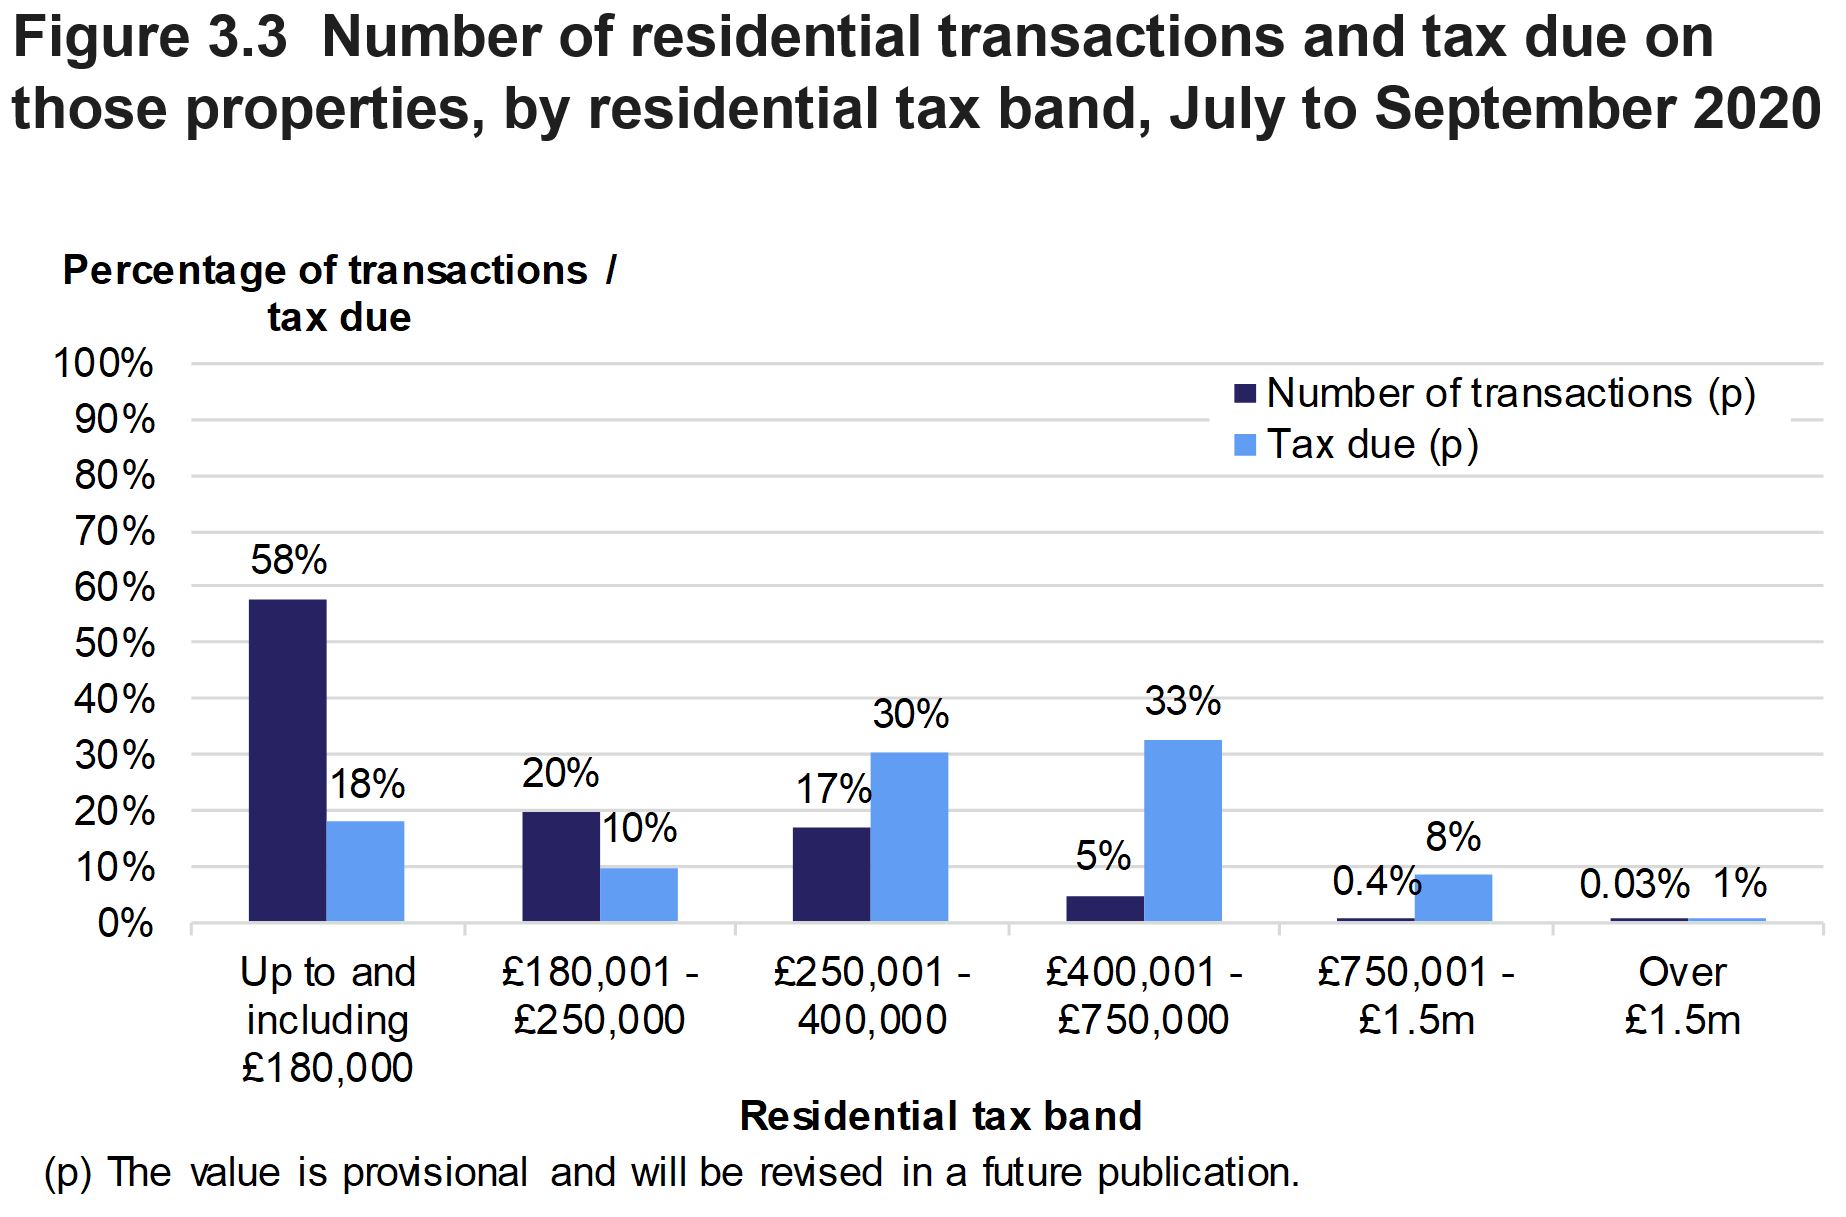 Figure 3.3 shows the number of residential transactions and amount of tax due, by residential tax band. Data is presented as the percentage of transactions or tax due and relates to transactions effective in July to September 2020.